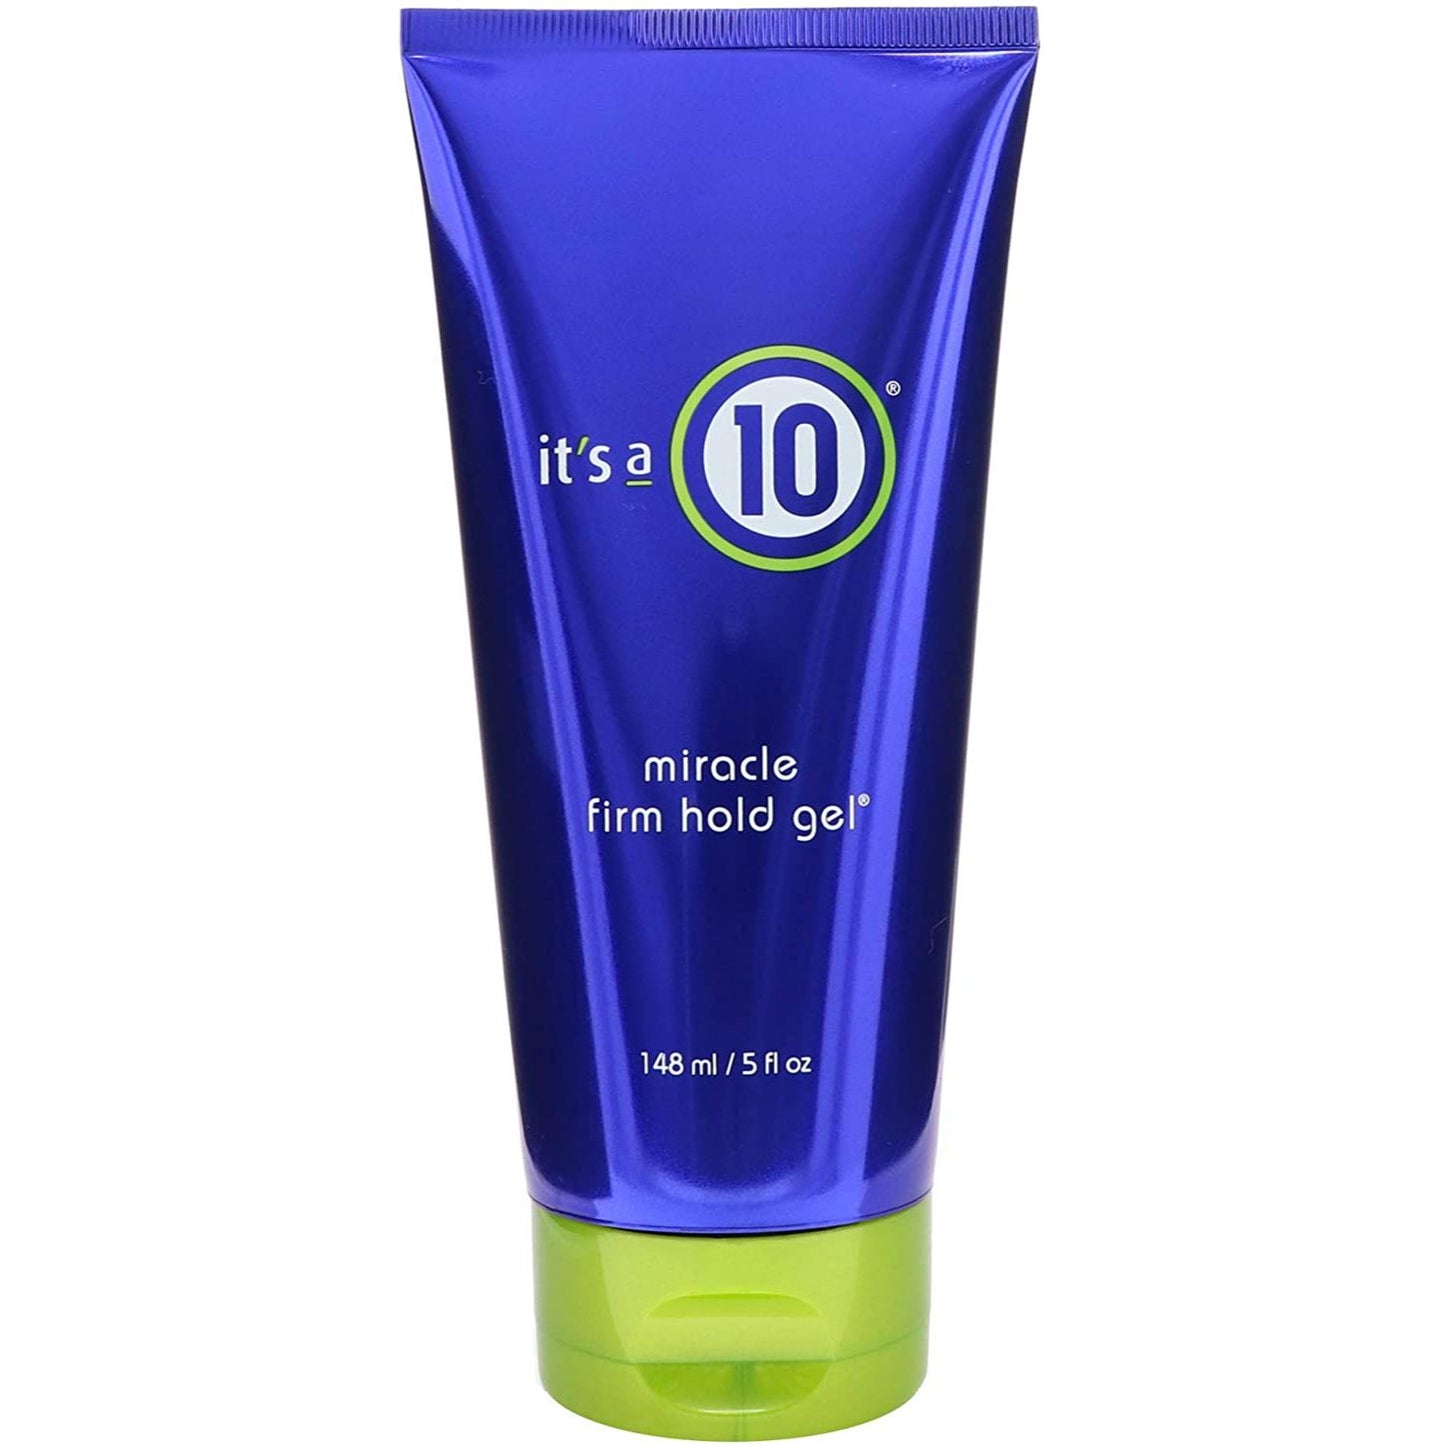 It's a 10 Miracle Firm Hold Gel